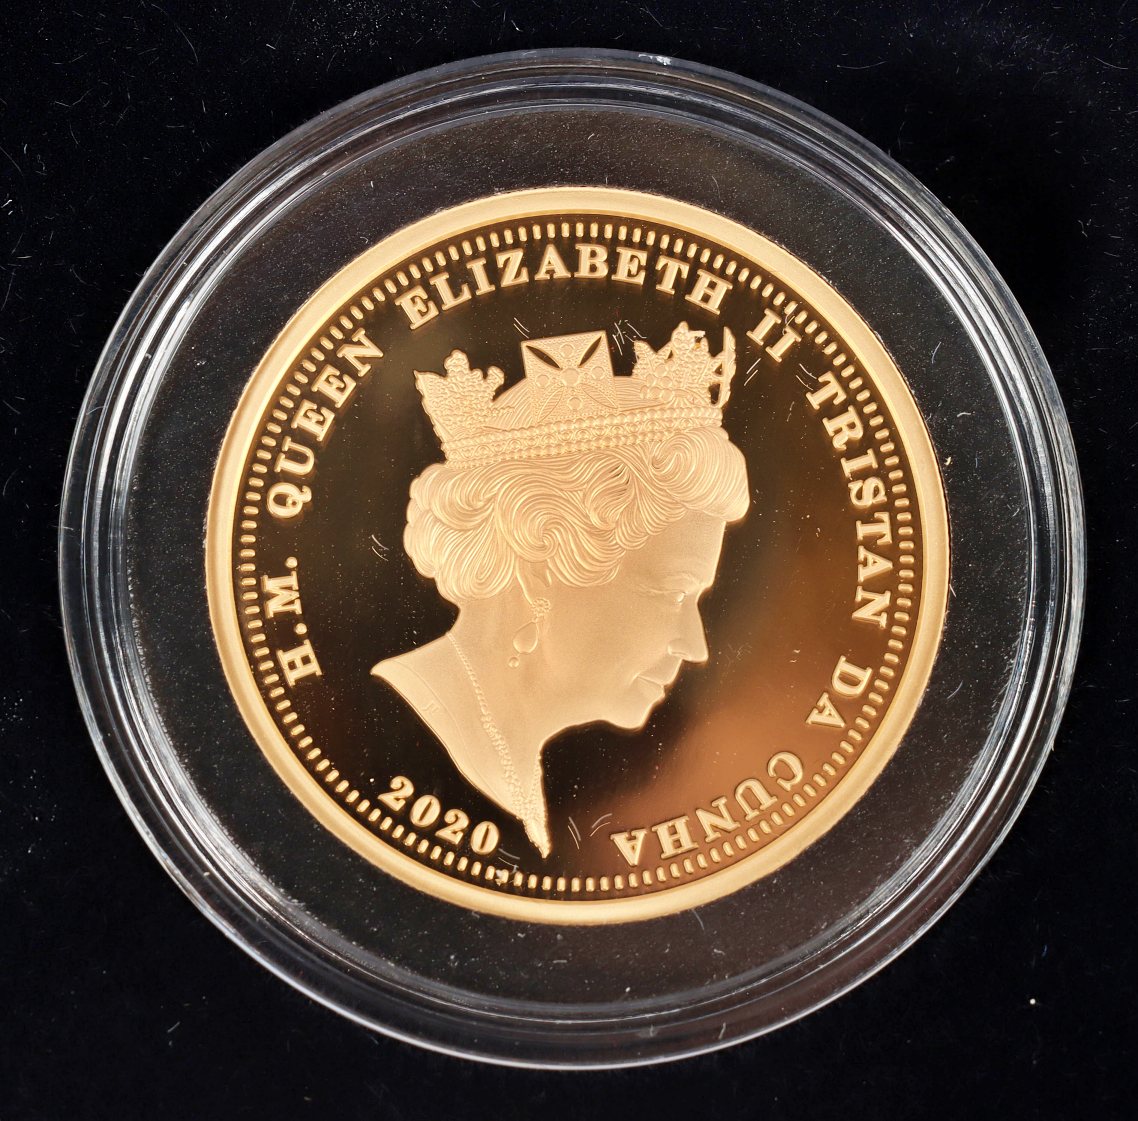 Tristan da Cunha Two Pounds, Proof 2020 - Image 3 of 3